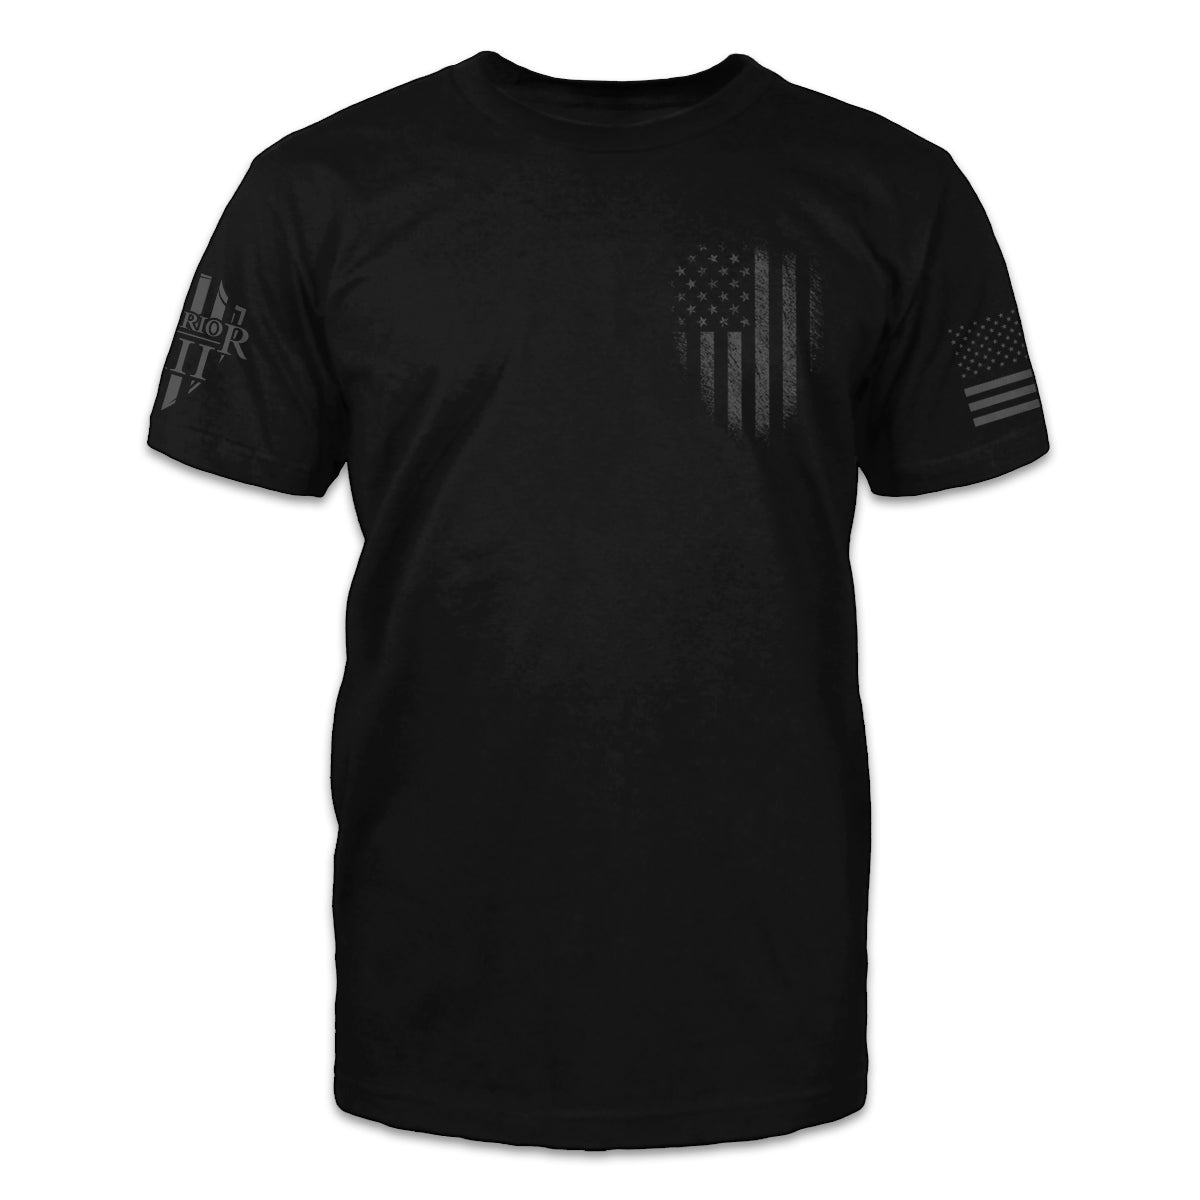 A darkened American flag emblem printed on the front of the t-shirt.